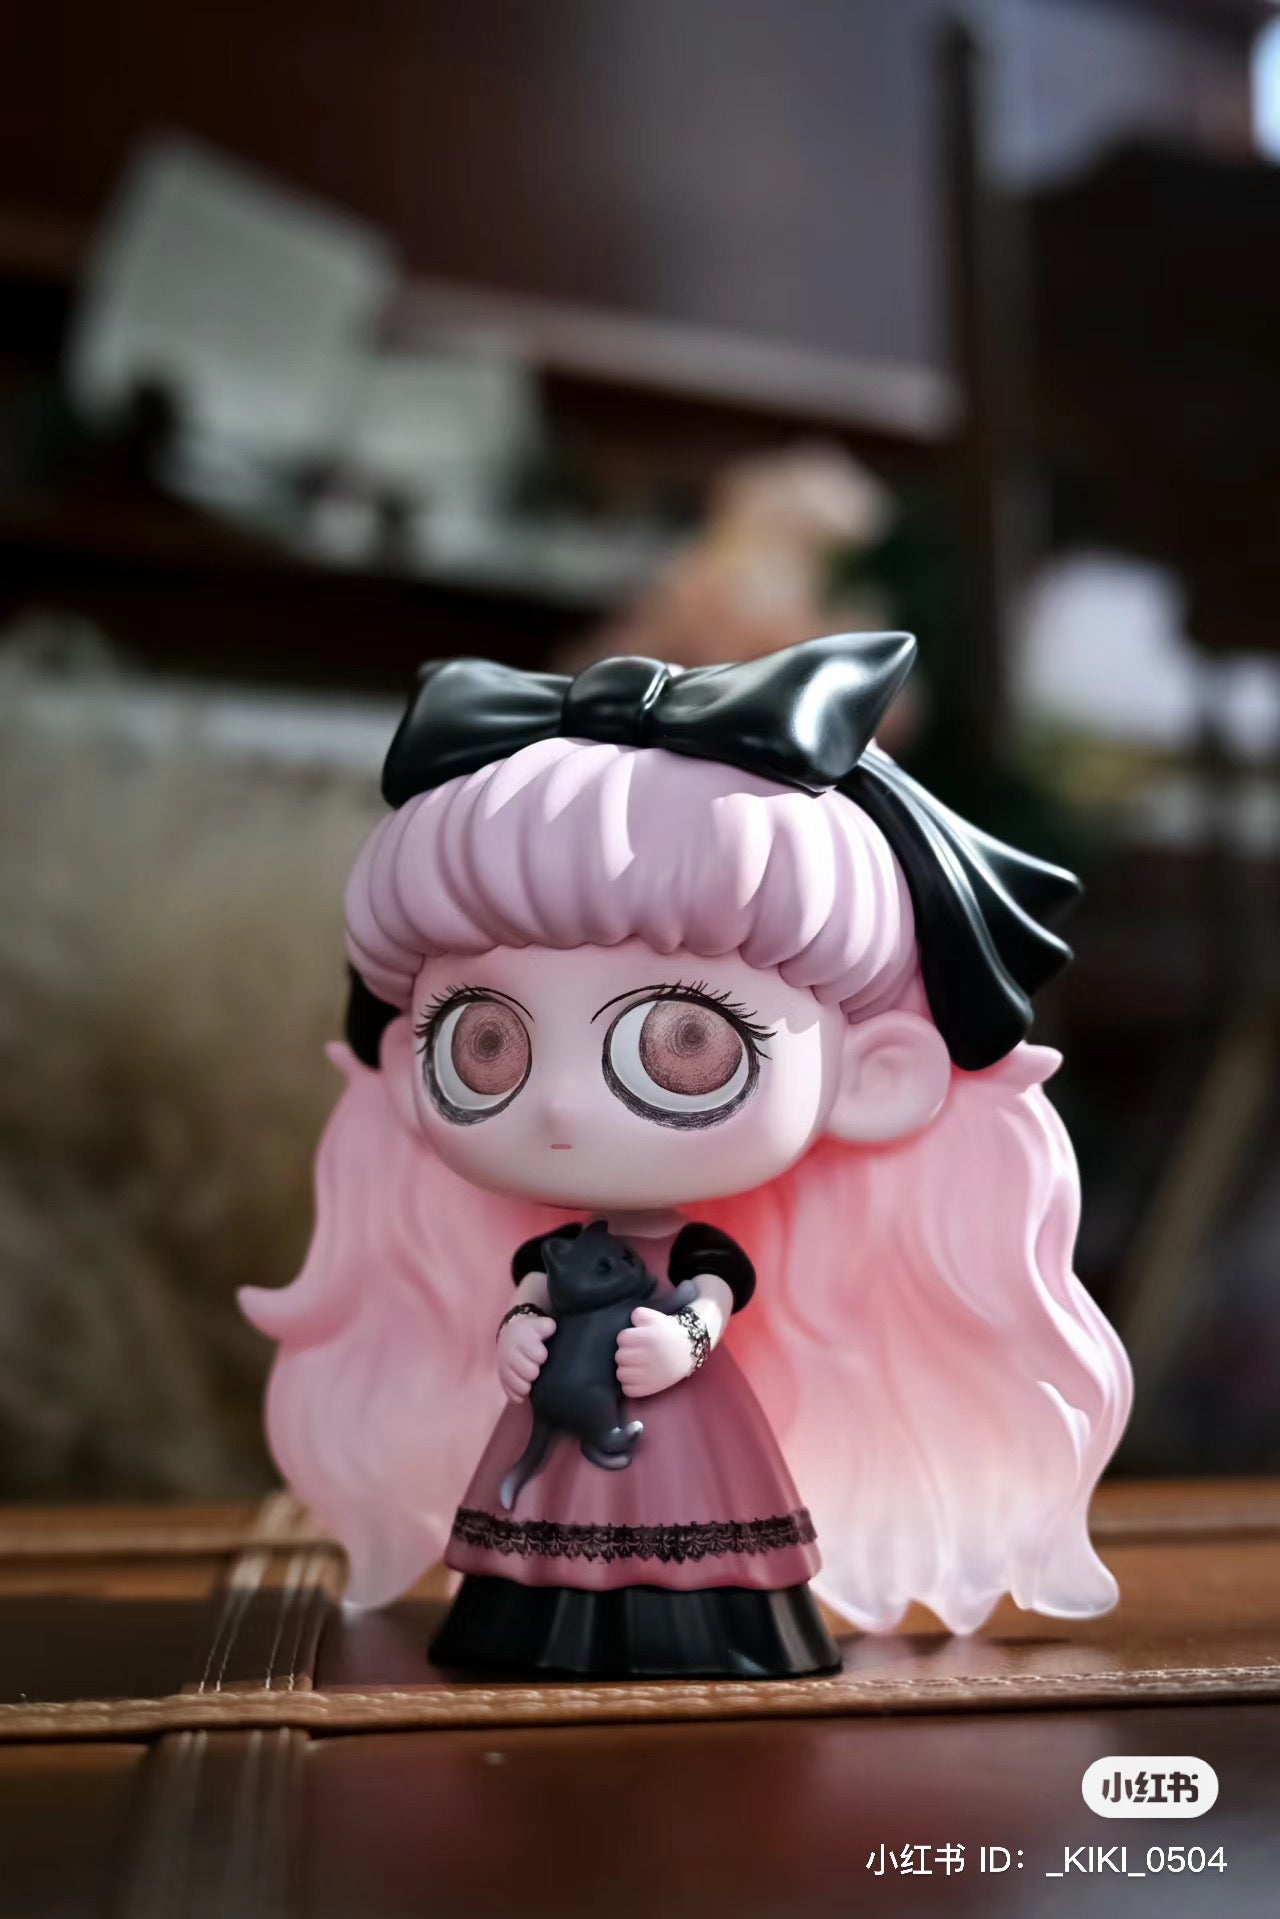 A toy figurine of Kiki Cat Witch, a girl holding a cat, in resin/PVC, 11cm. From Strangecat Toys, a blind box and art toy store.